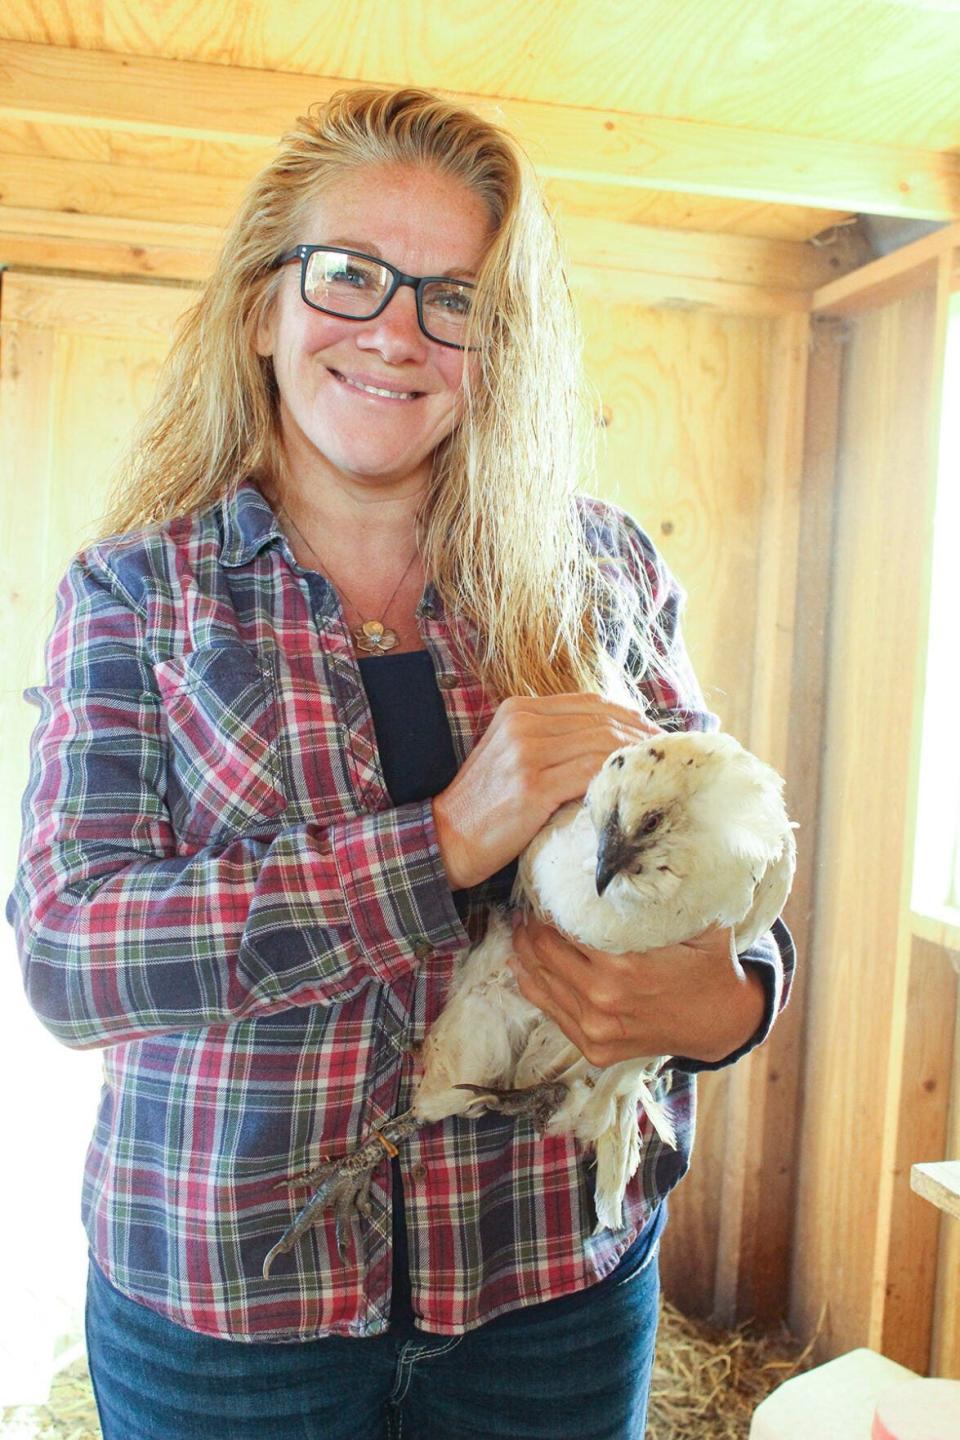 Mercer County farmer veteran Amy Hess raises several breeds of laying hens and dual-purpose chickens on her farm near Aledo.